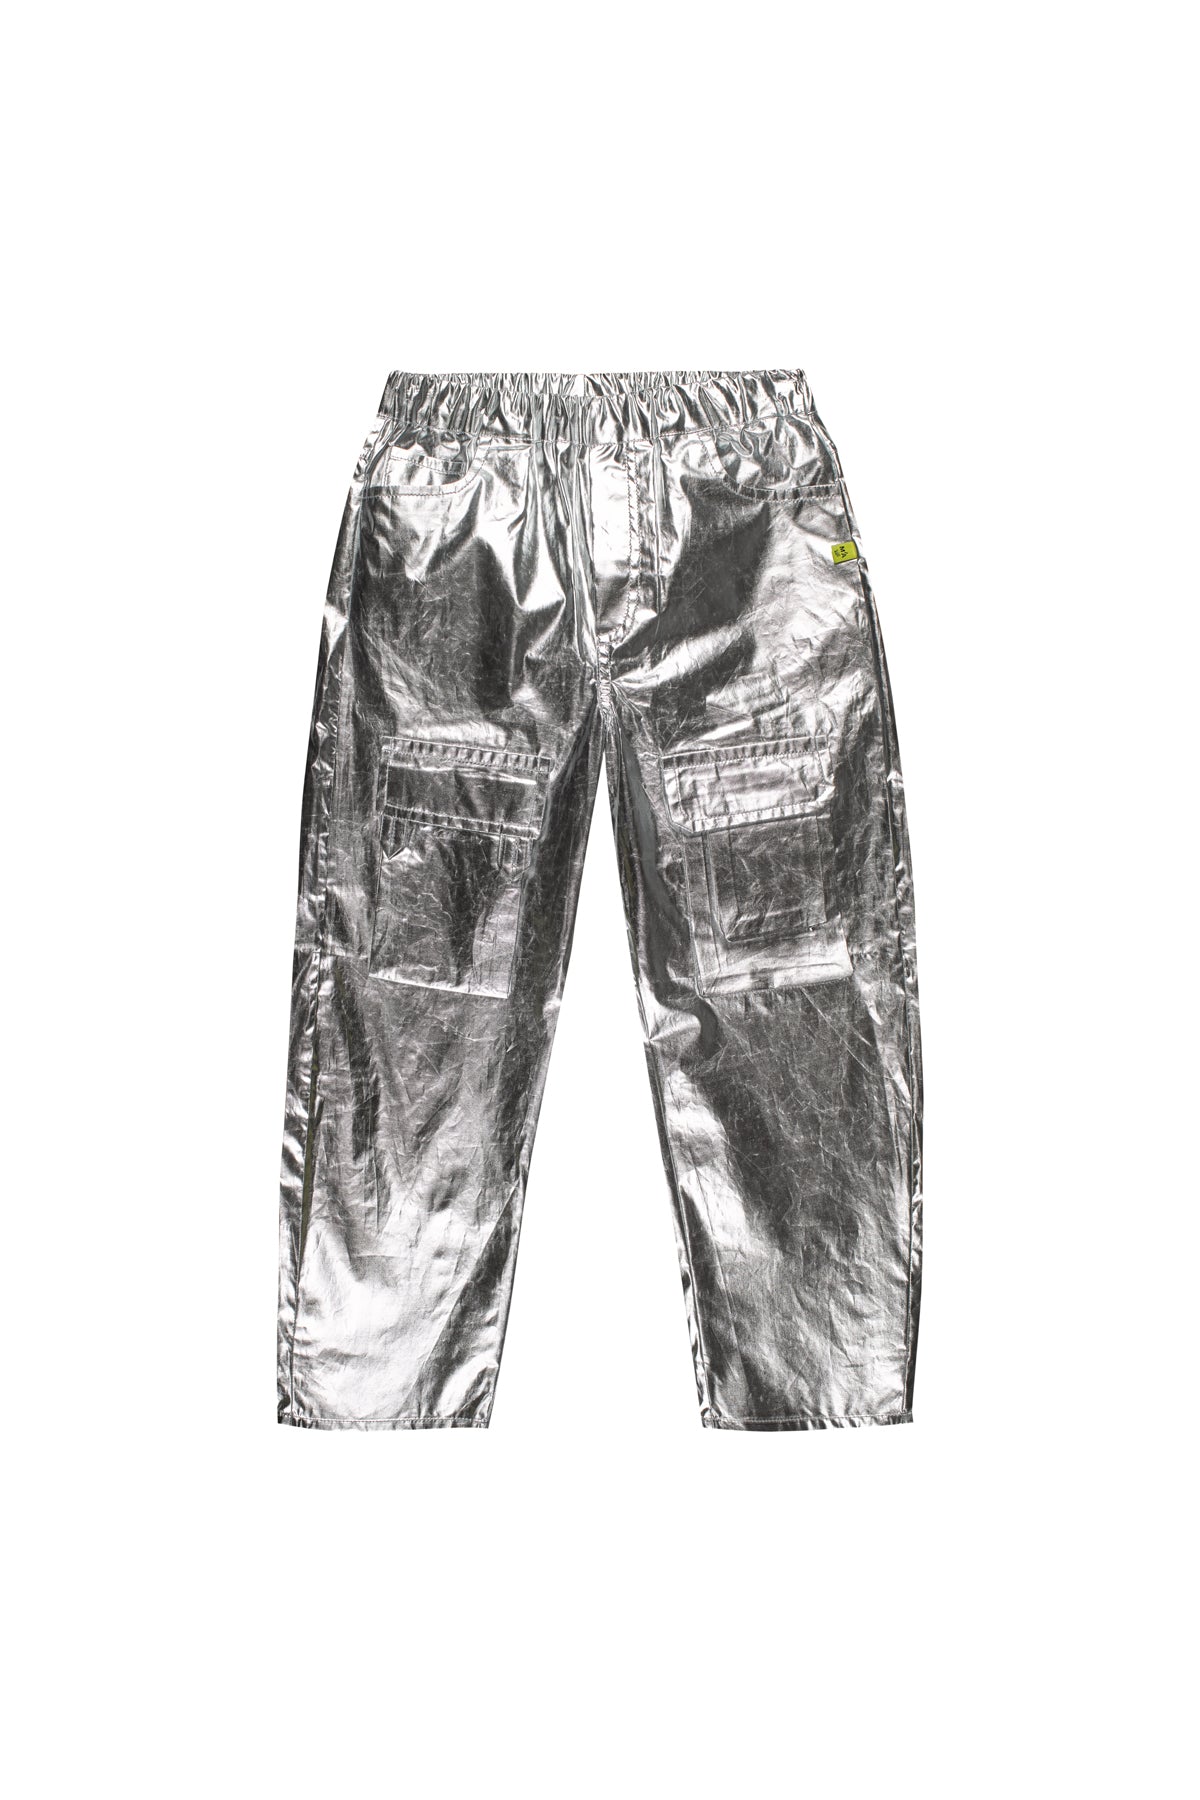 FOIL CARGO TROUSERS makids